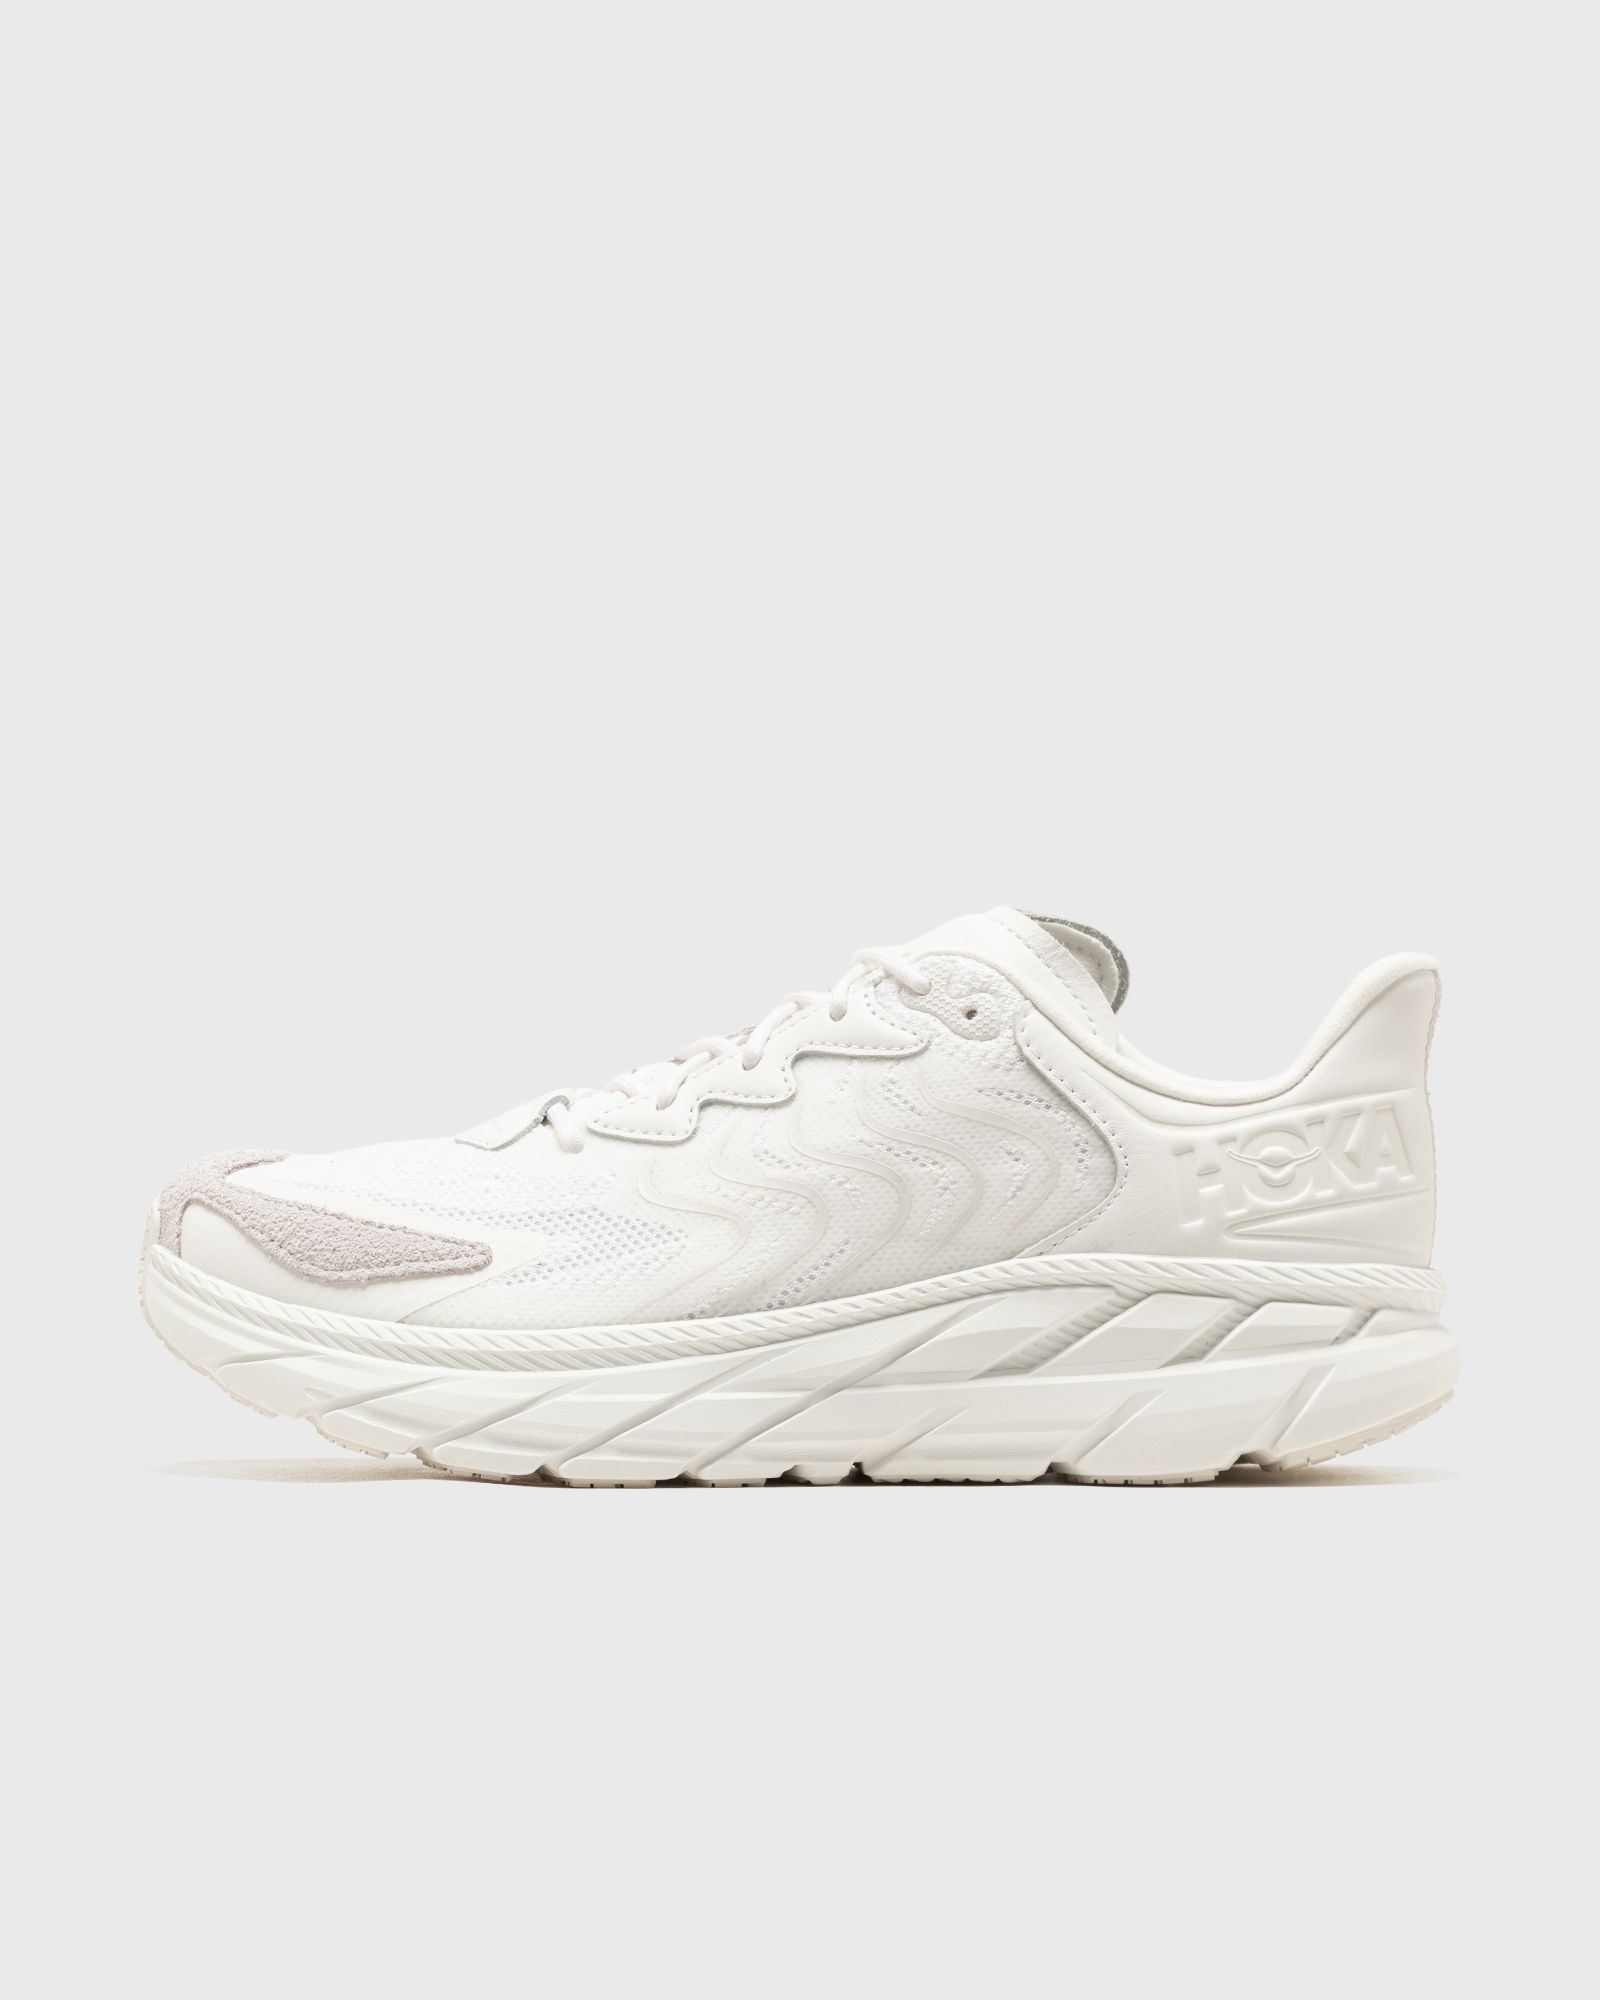 Hoka One One - clifton ls men lowtop|performance & sports white in größe:44 2/3